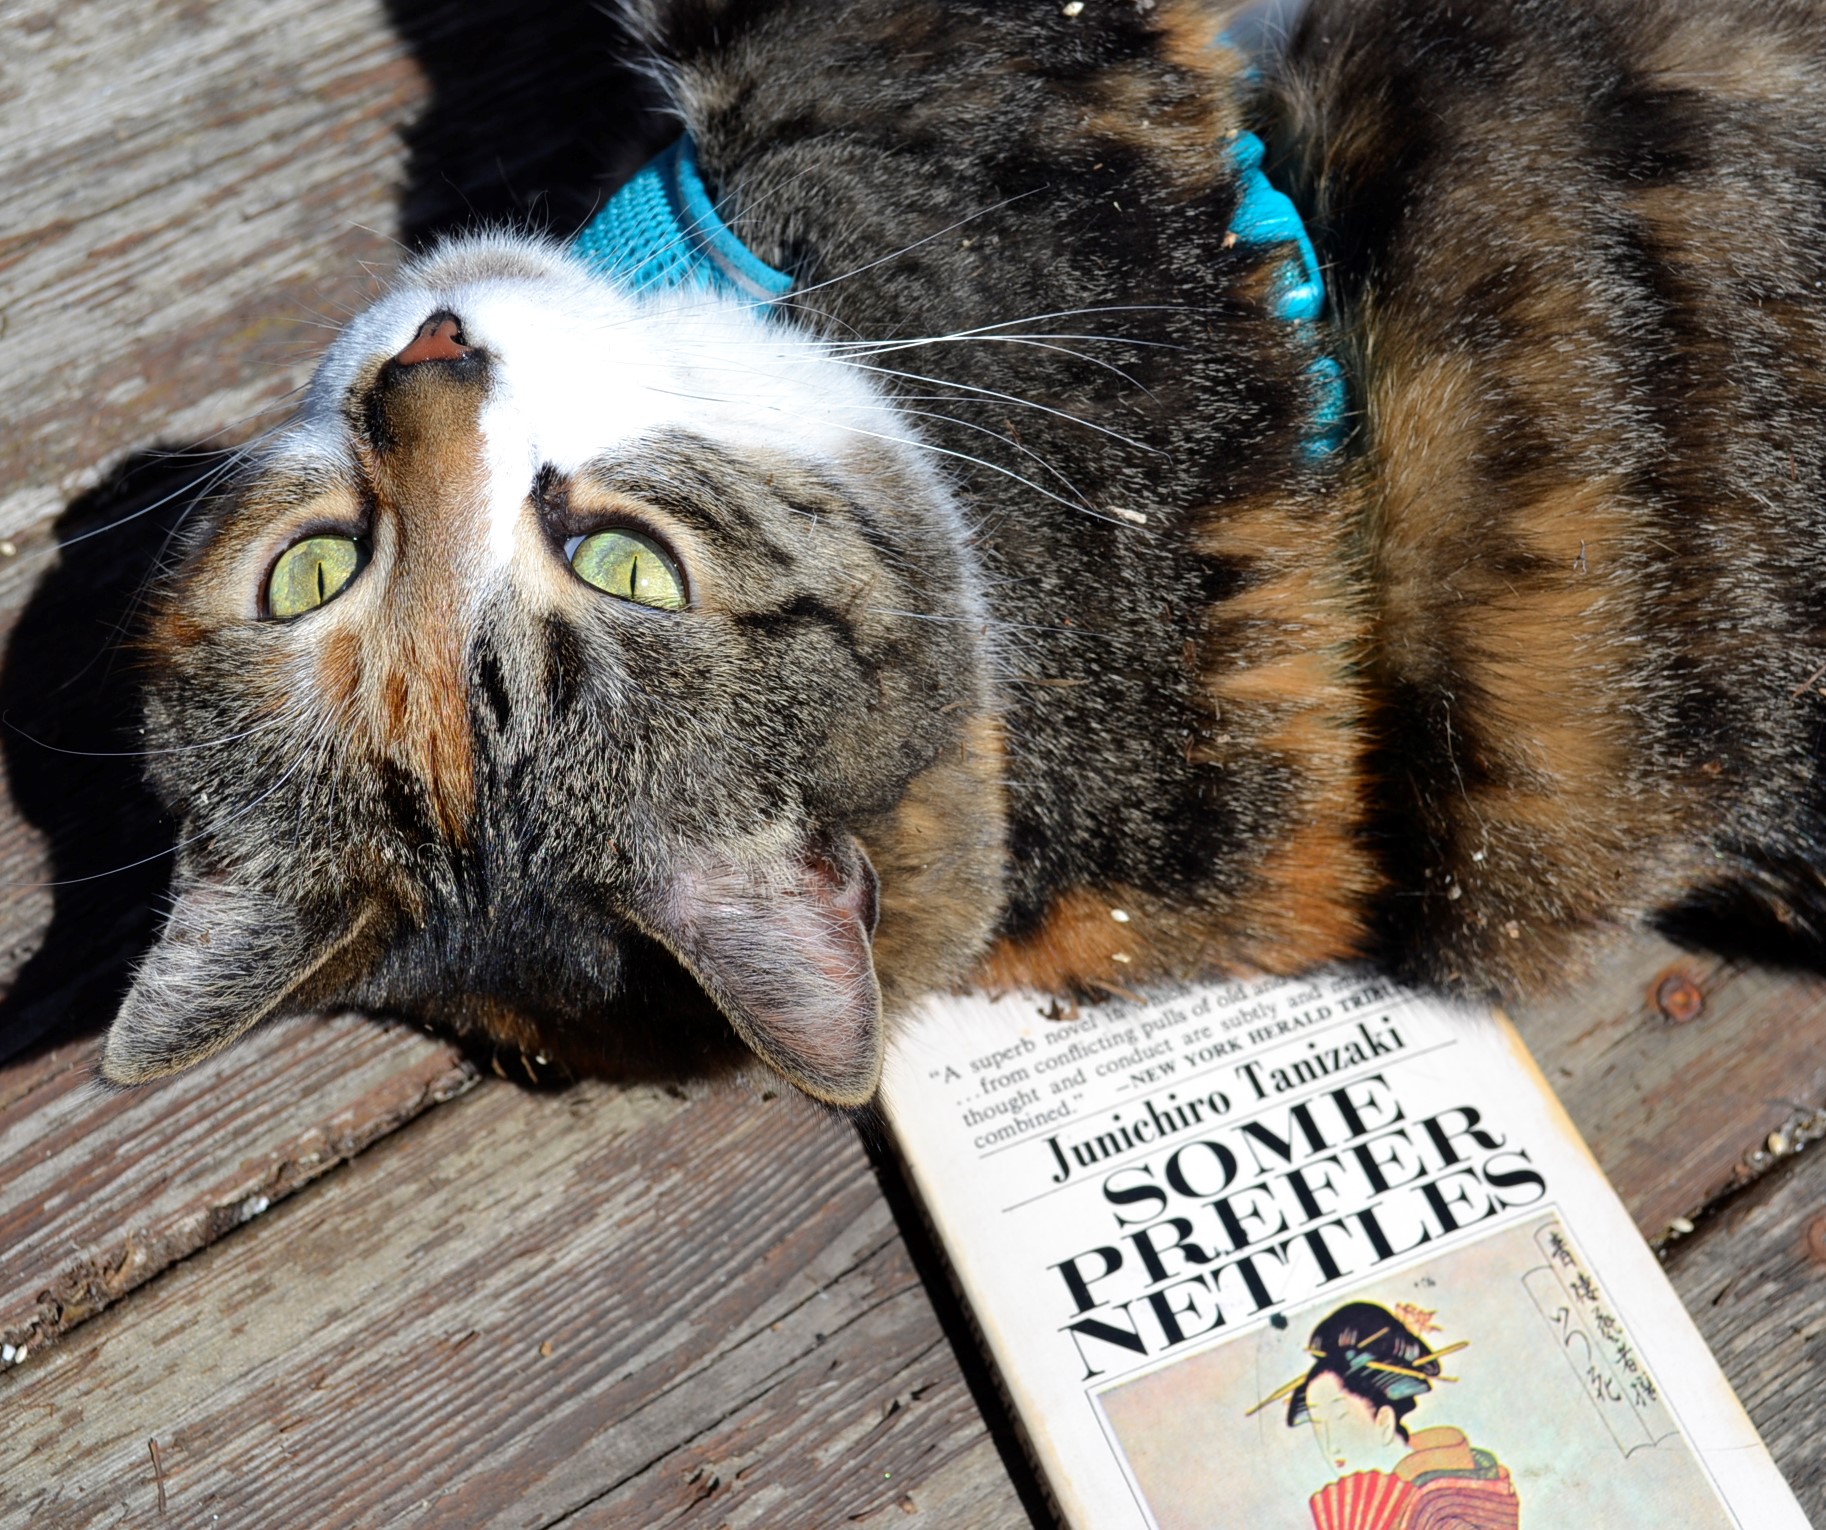 A calico tabby rolls onto a book. The title — Some Prefer Nettles — can be seen beneath her shoulder.